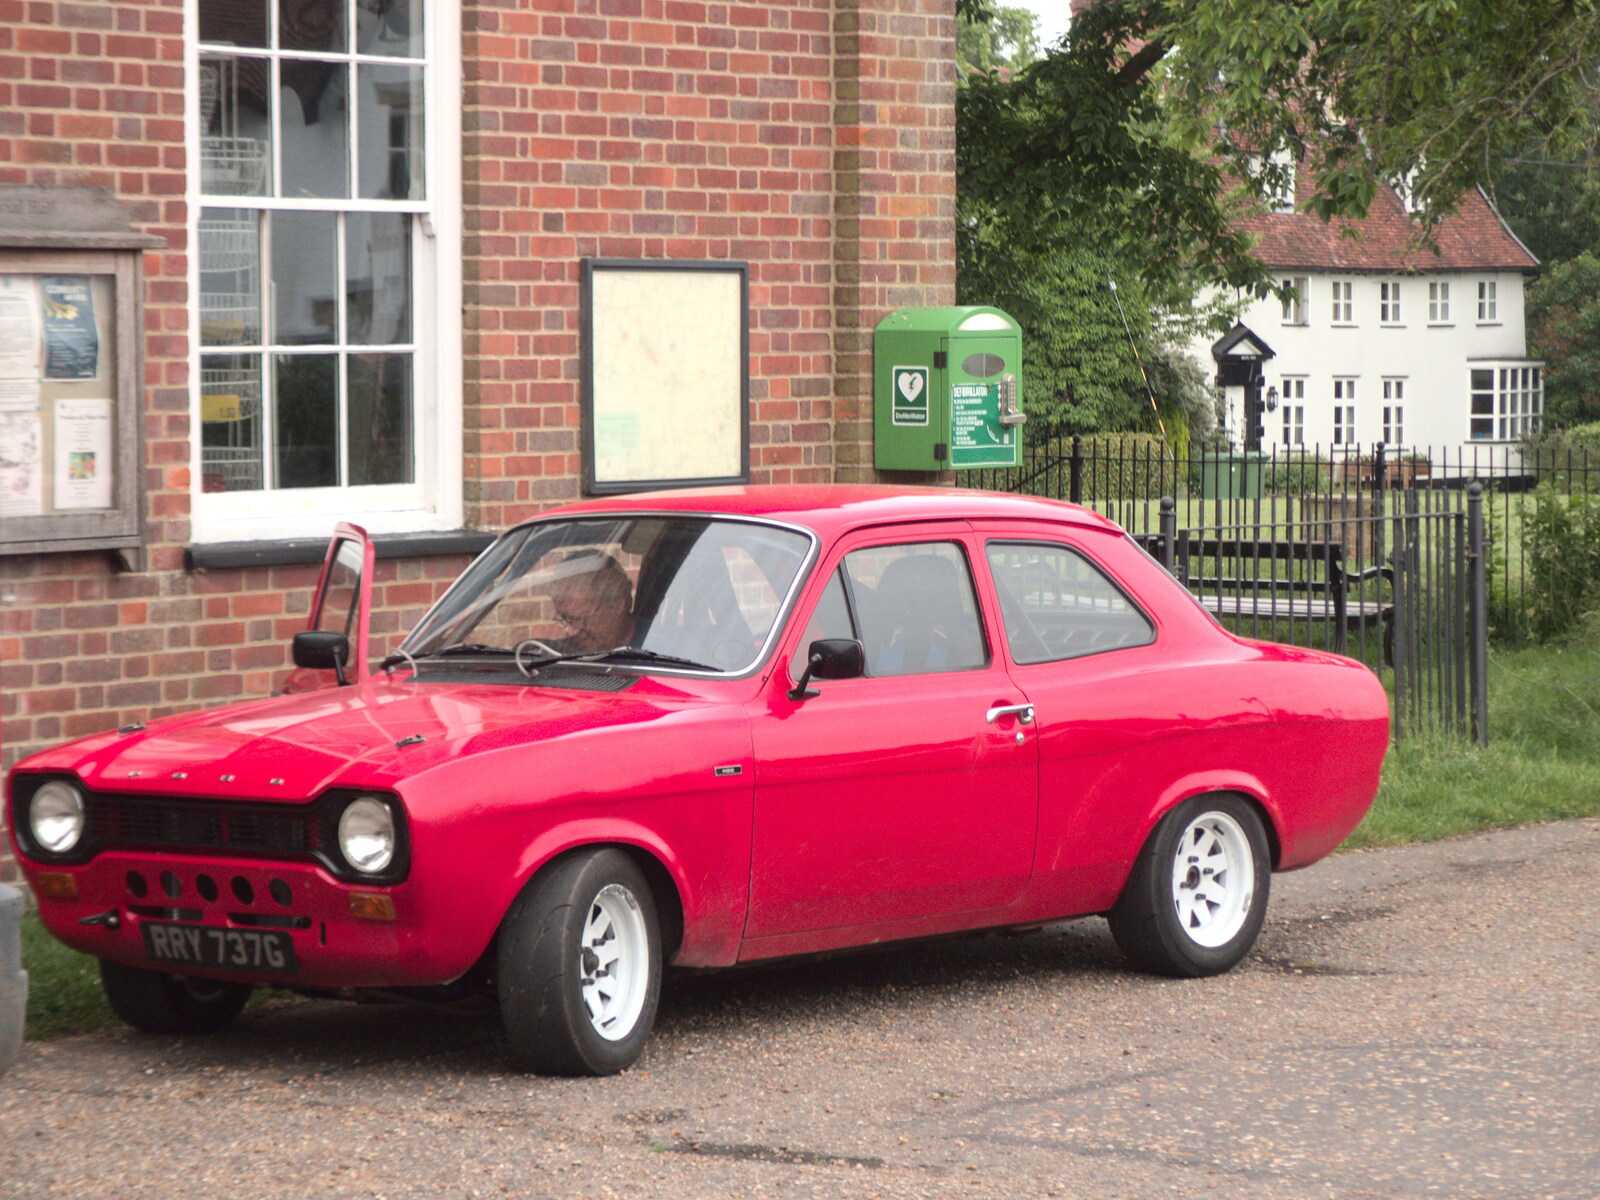 A cool Mark I Ford Escort from A BSCC Ride to Pulham Market, Norfolk - 17th June 2021